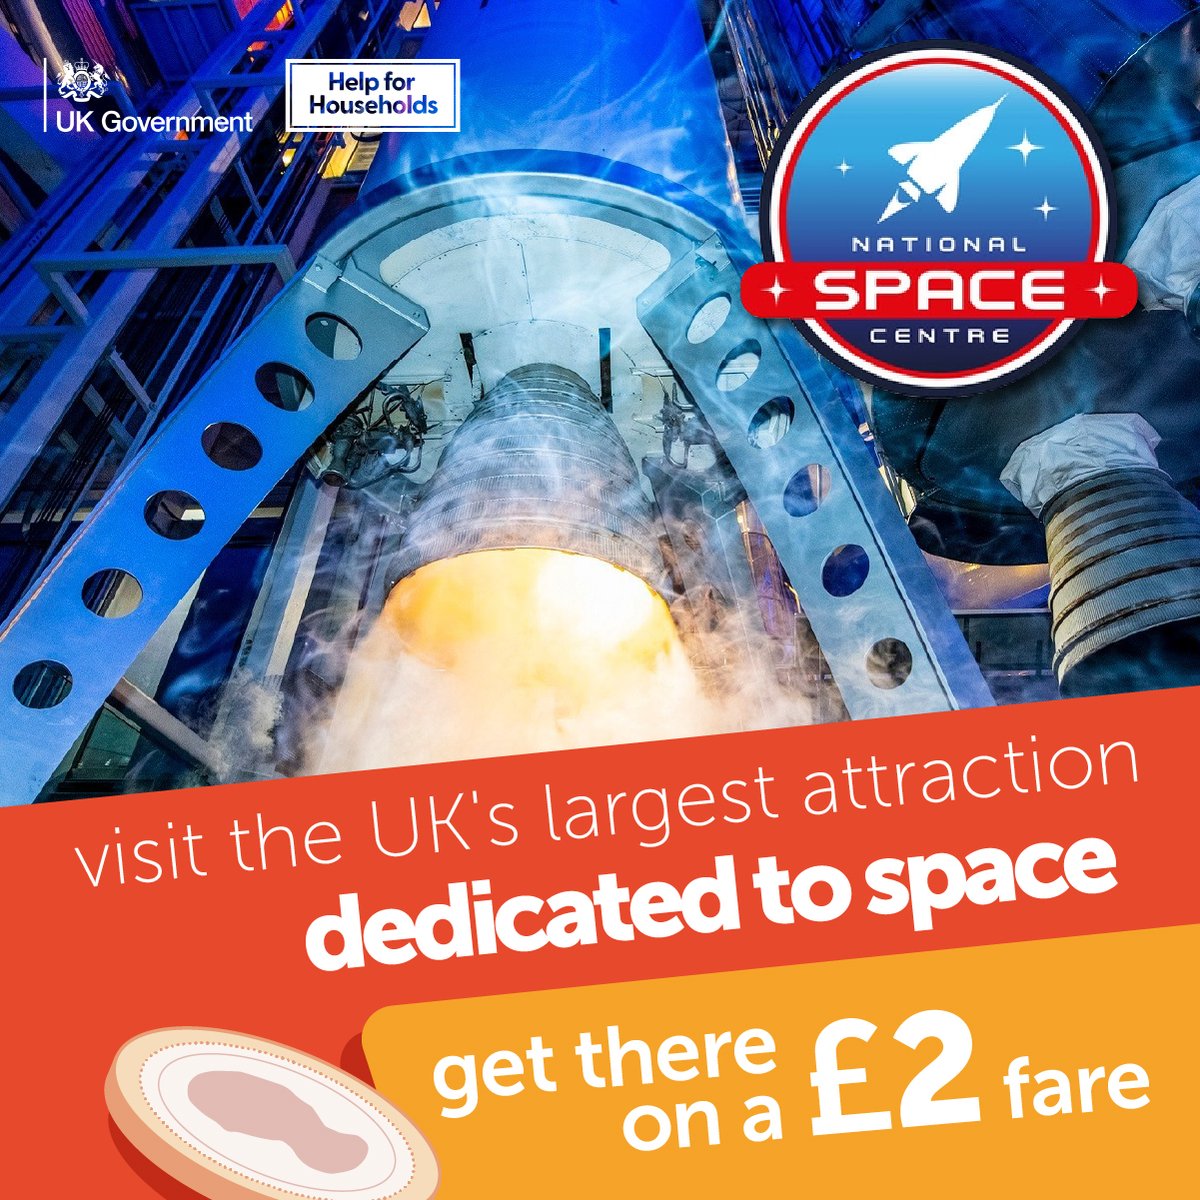 Visit the UK's largest planetarium and interactive galleries to discover the past, present, and future of space exploration 🚀 Let us take you there on the £2 fare, our skylink bus runs every 20 minutes along Abbey Lane 🚍 Plan your trip today orlo.uk/L85MW